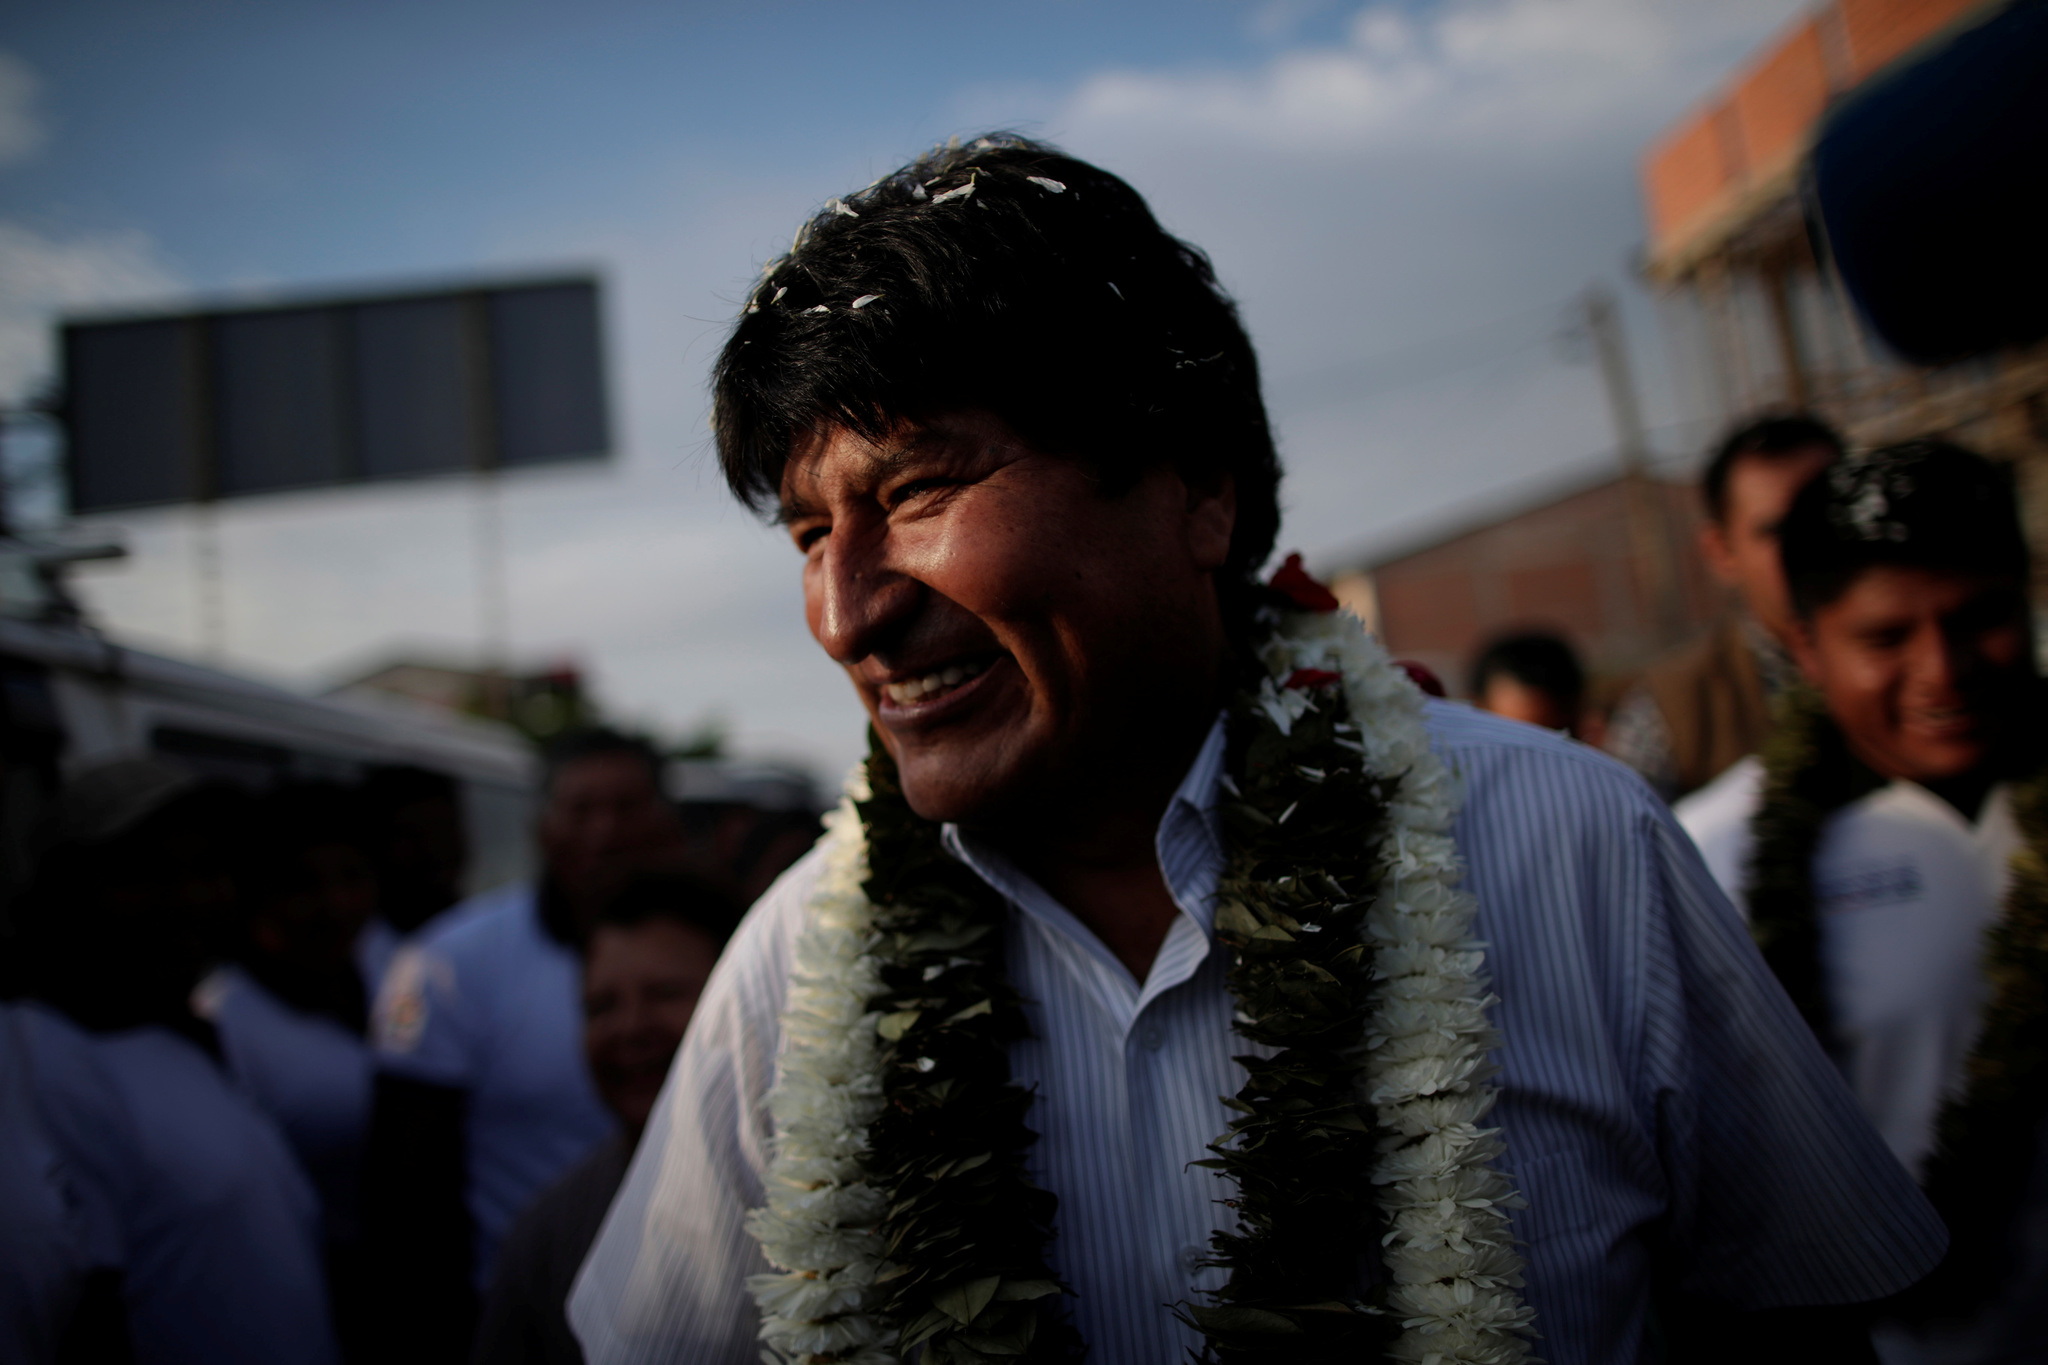 Presidential election in Bolivia